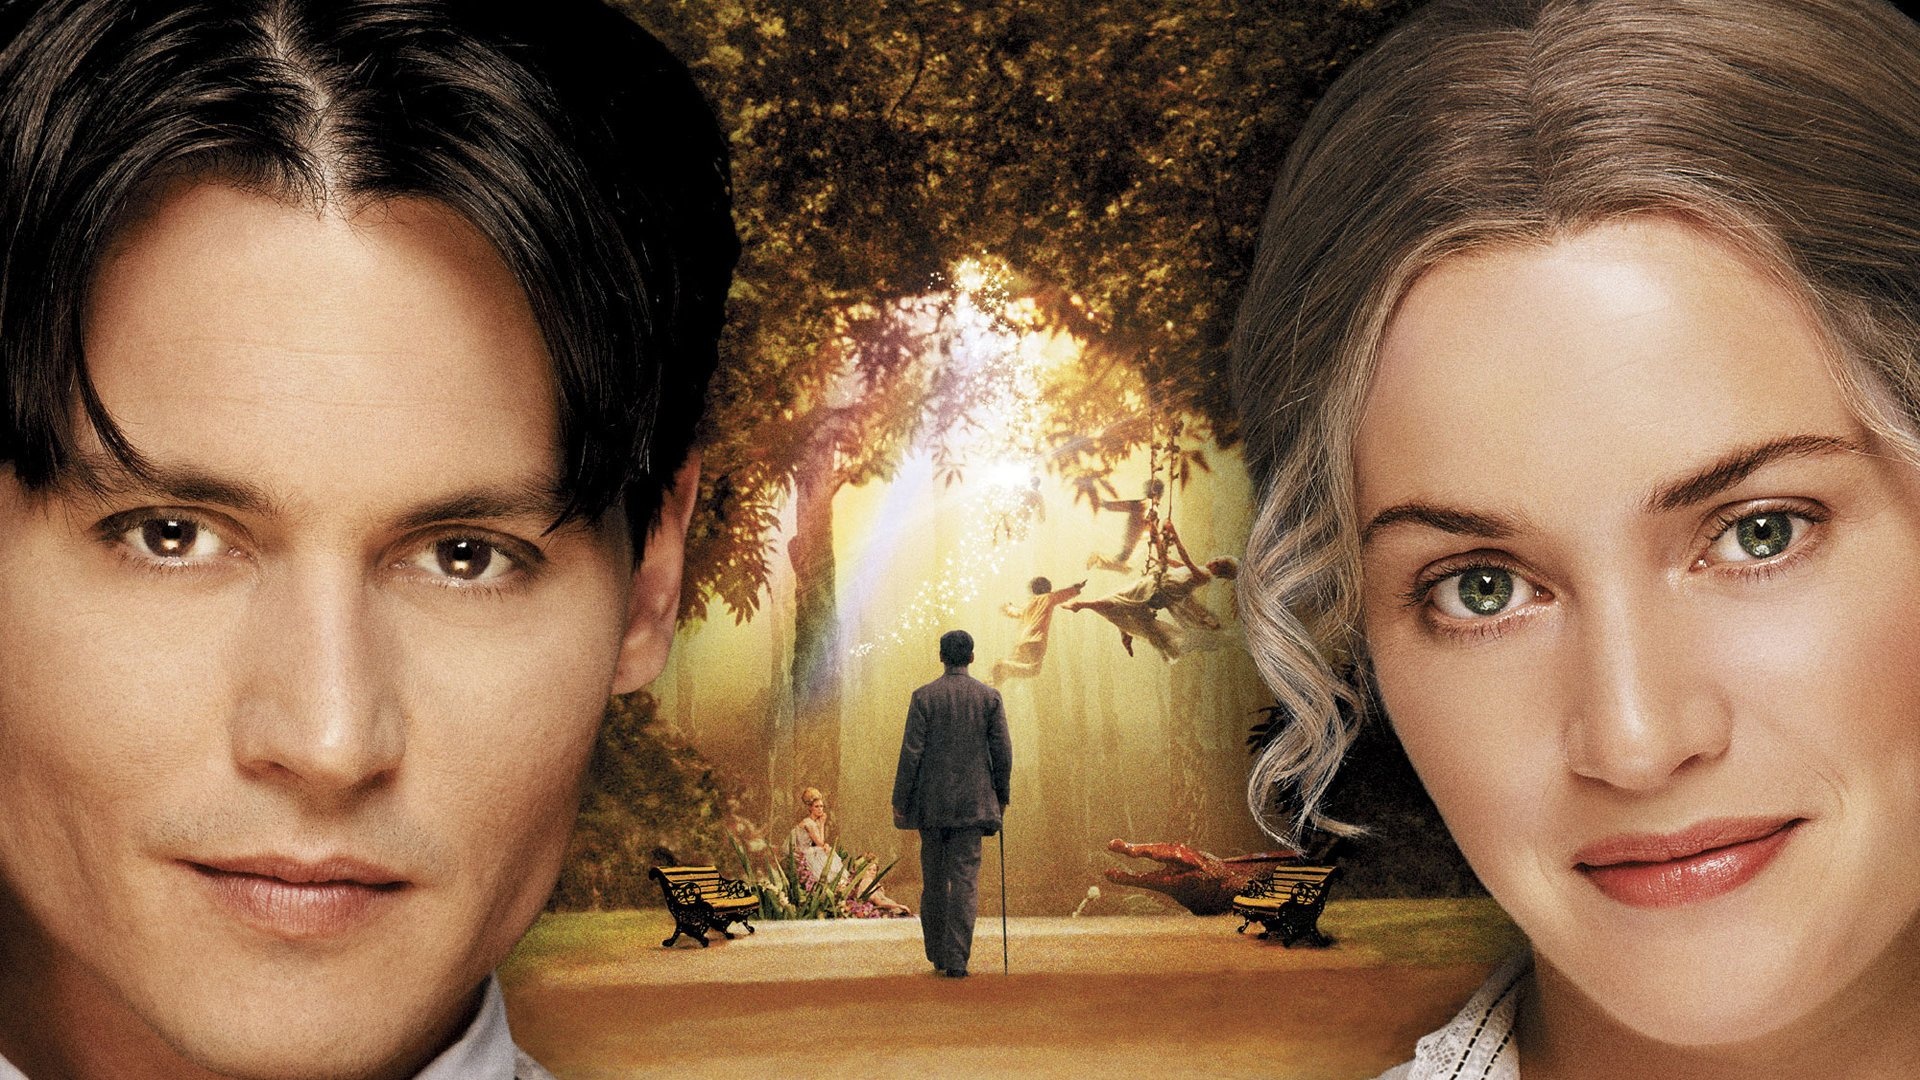 Finding Neverland: Johnny Depp as J. M. Barrie, Kate Winslet as Sylvia Llewelyn Davies. 1920x1080 Full HD Background.